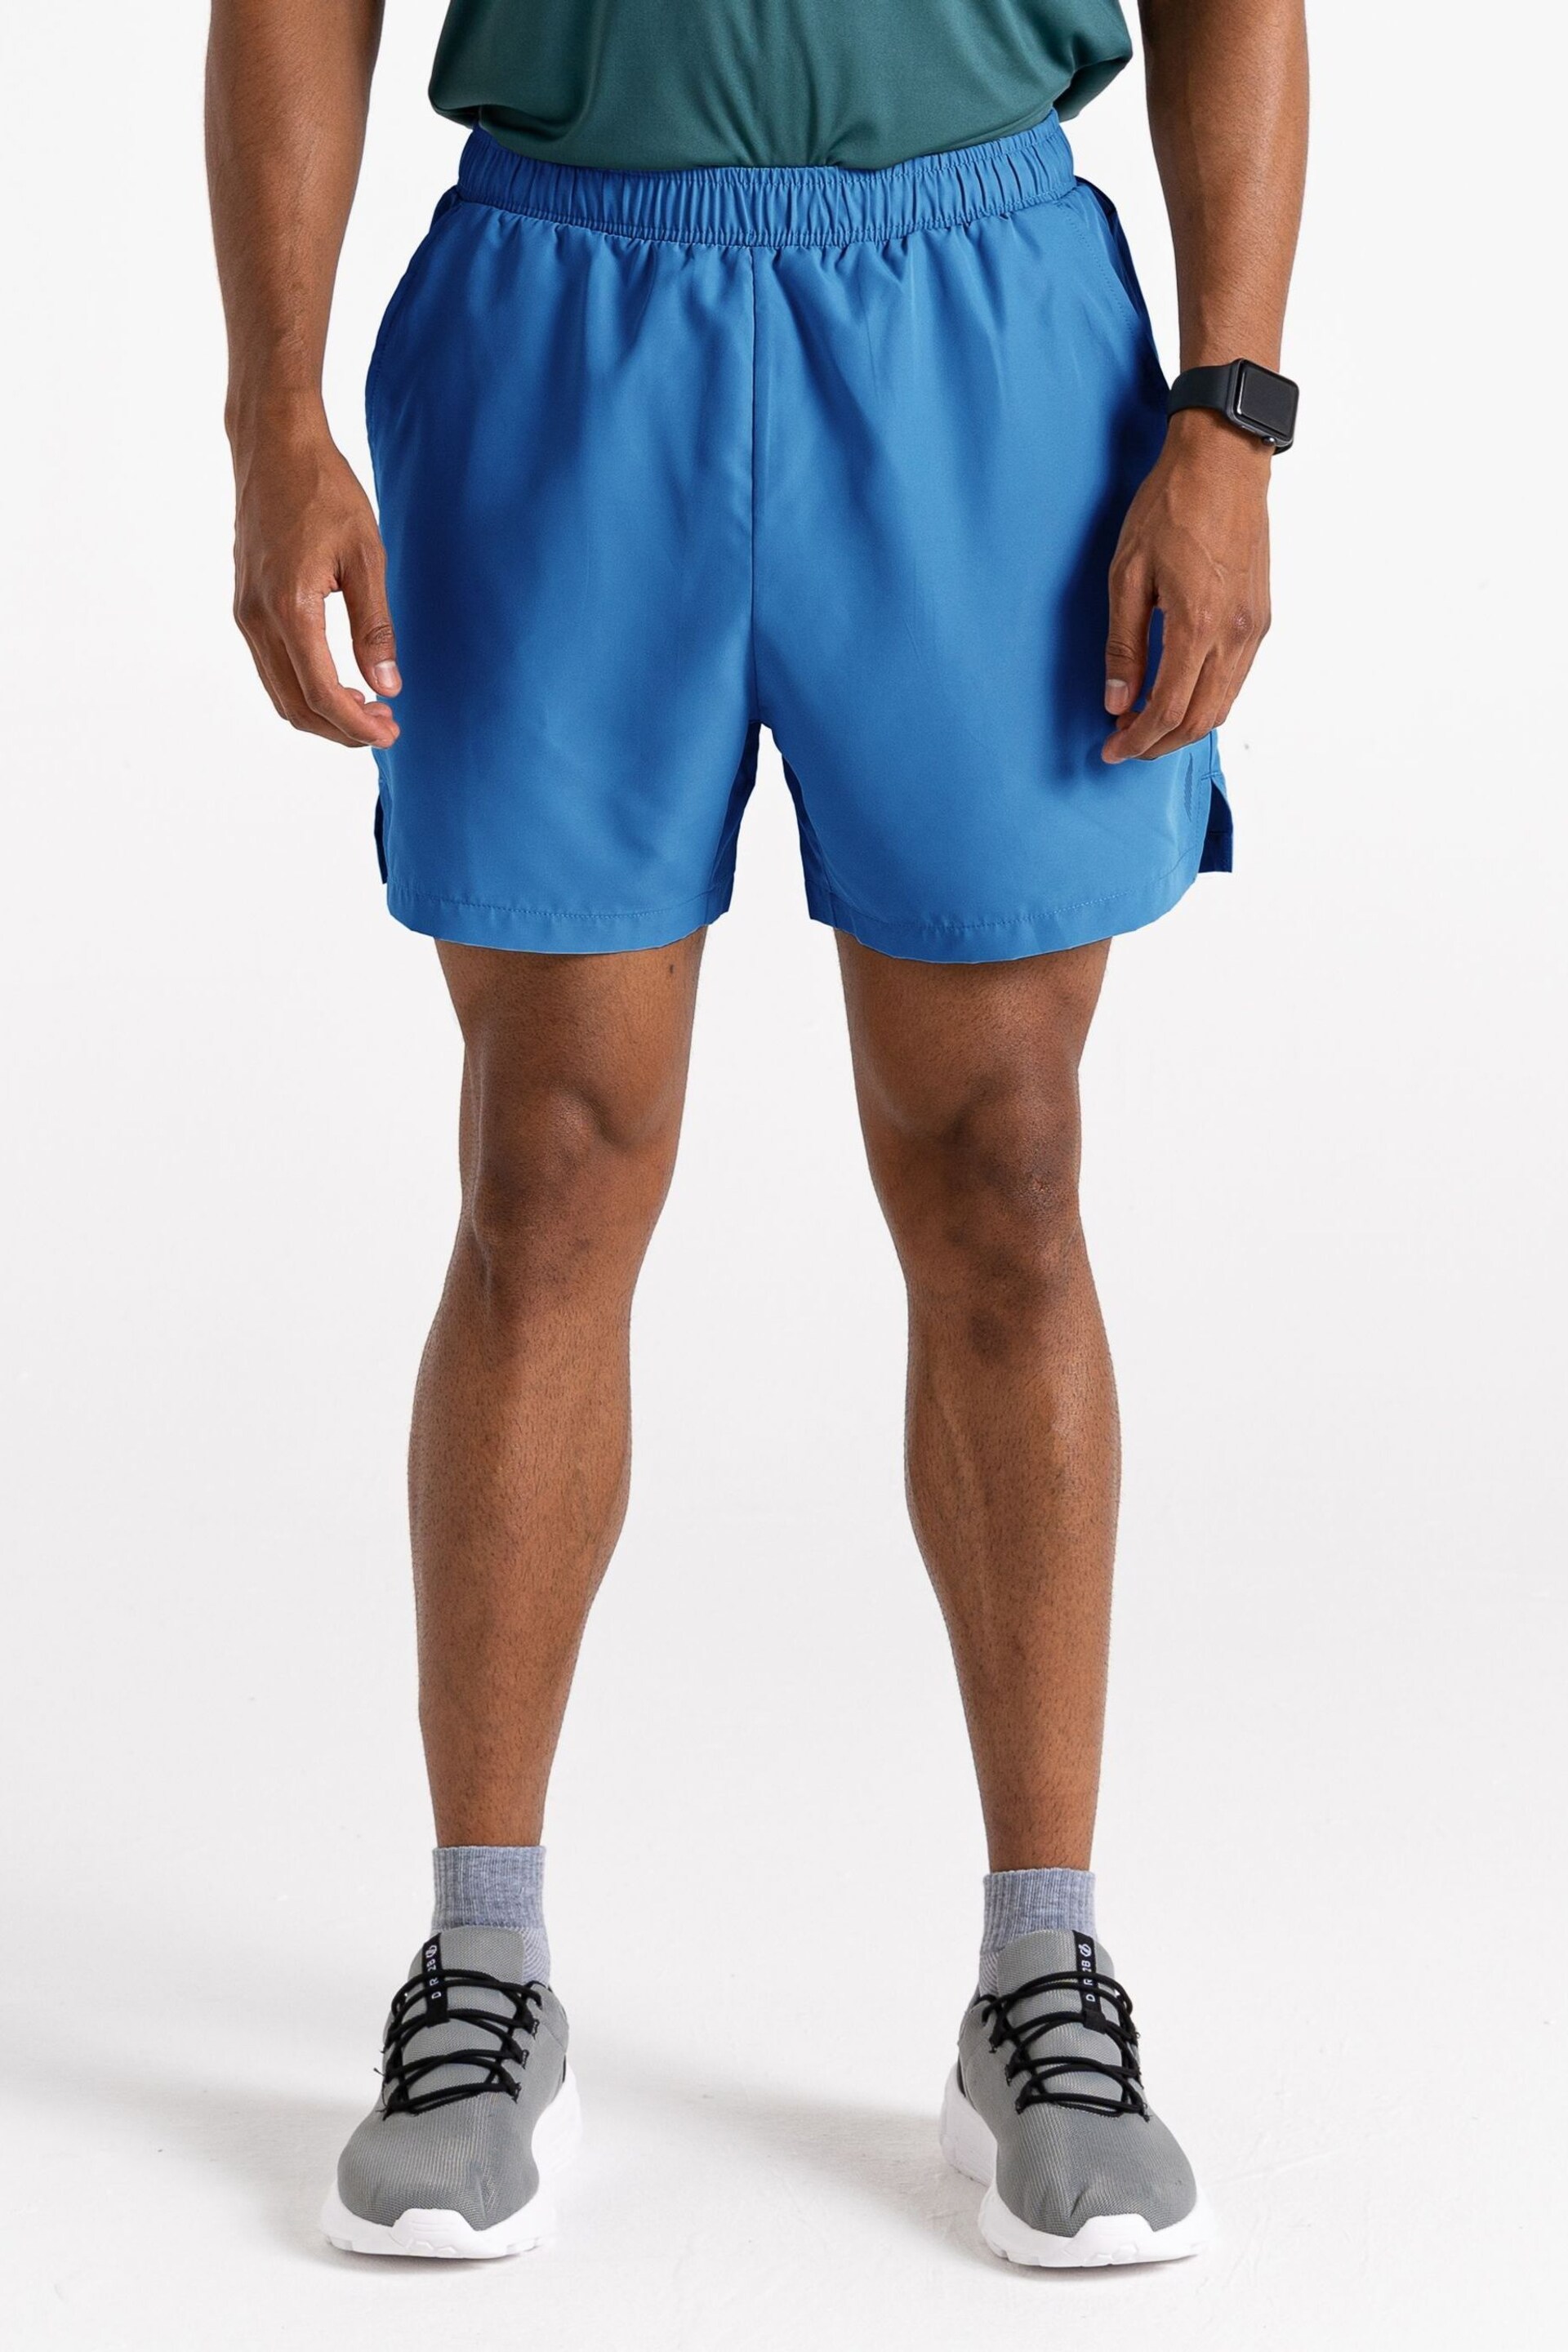 Dare 2b Blue Work Out Shorts - Image 2 of 6